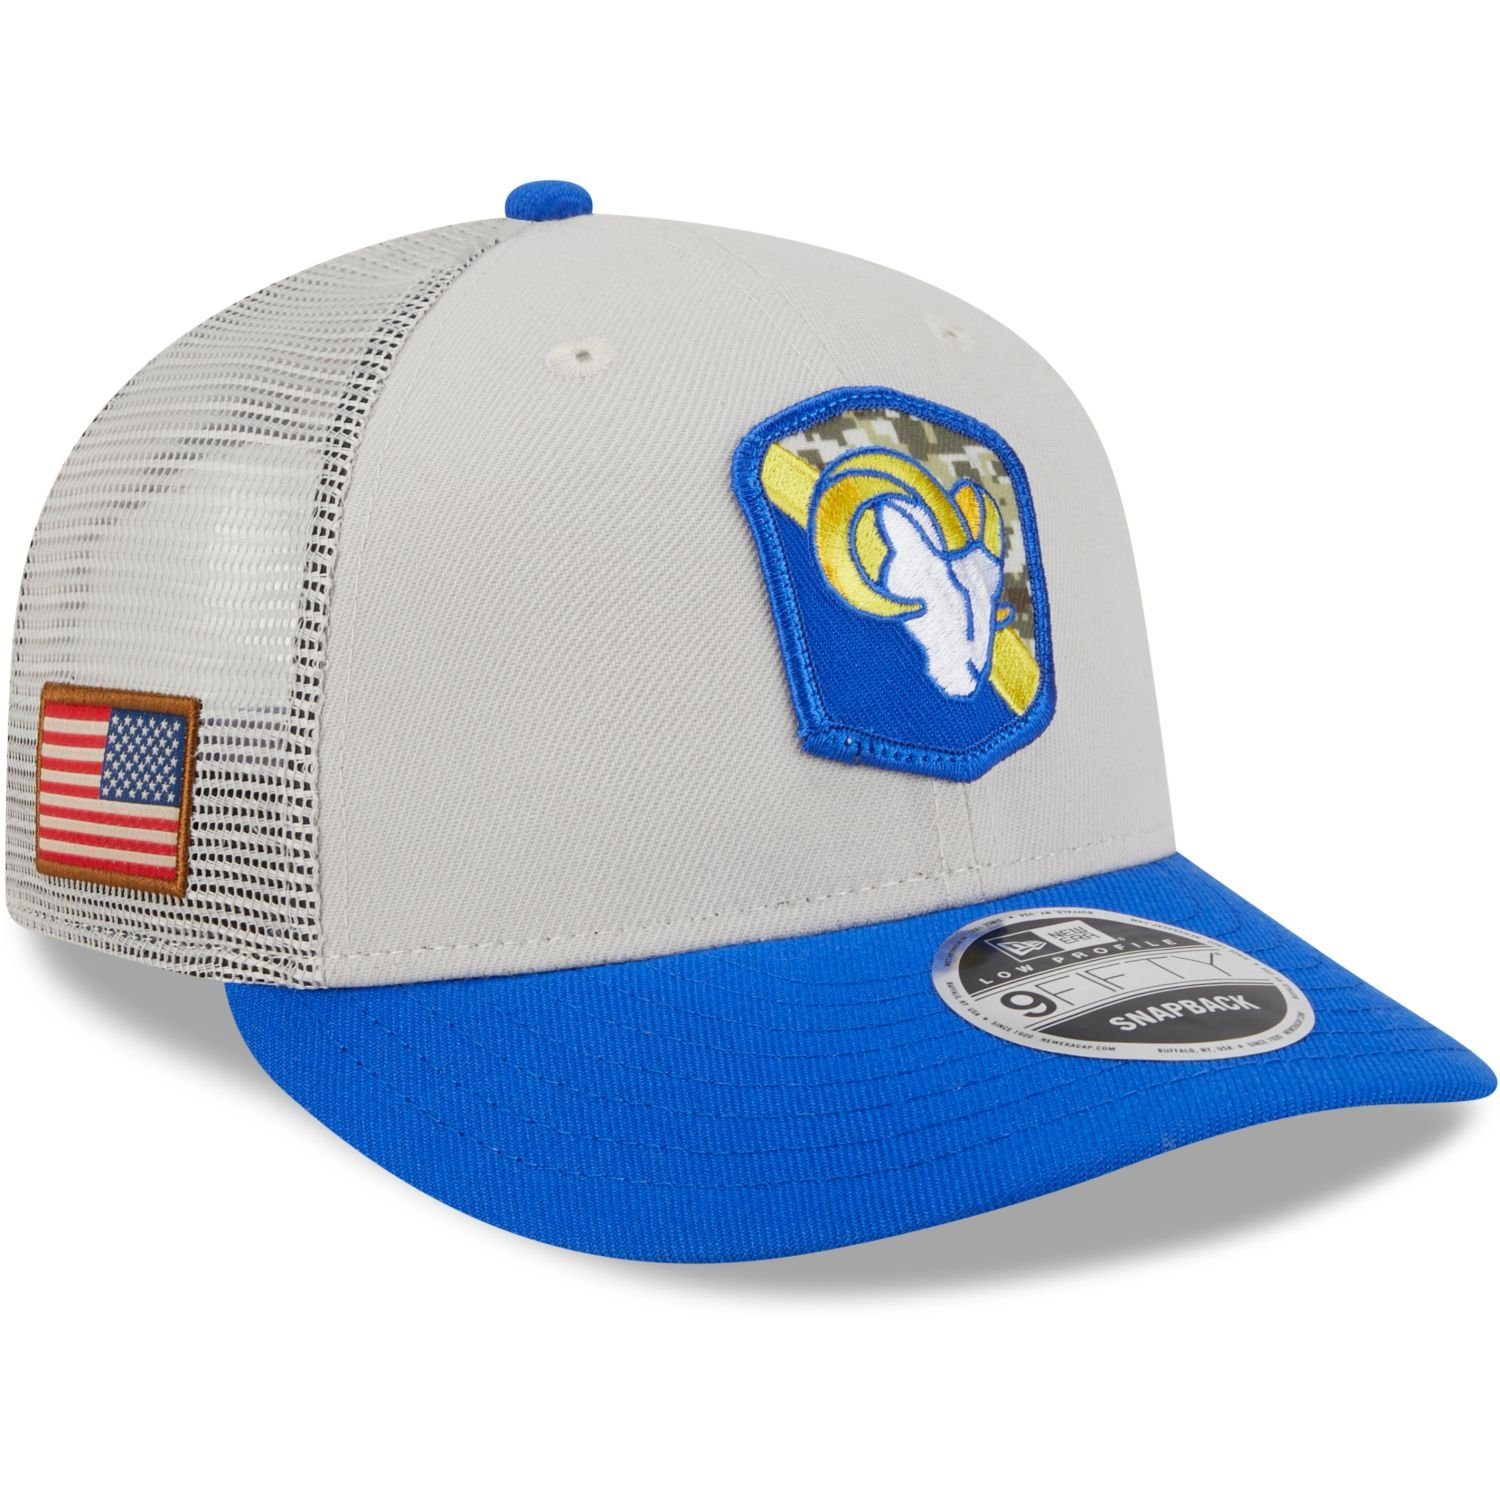 New Era Snapback Cap 9Fifty Low Profile Snap NFL Salute to Service Los Angeles Rams